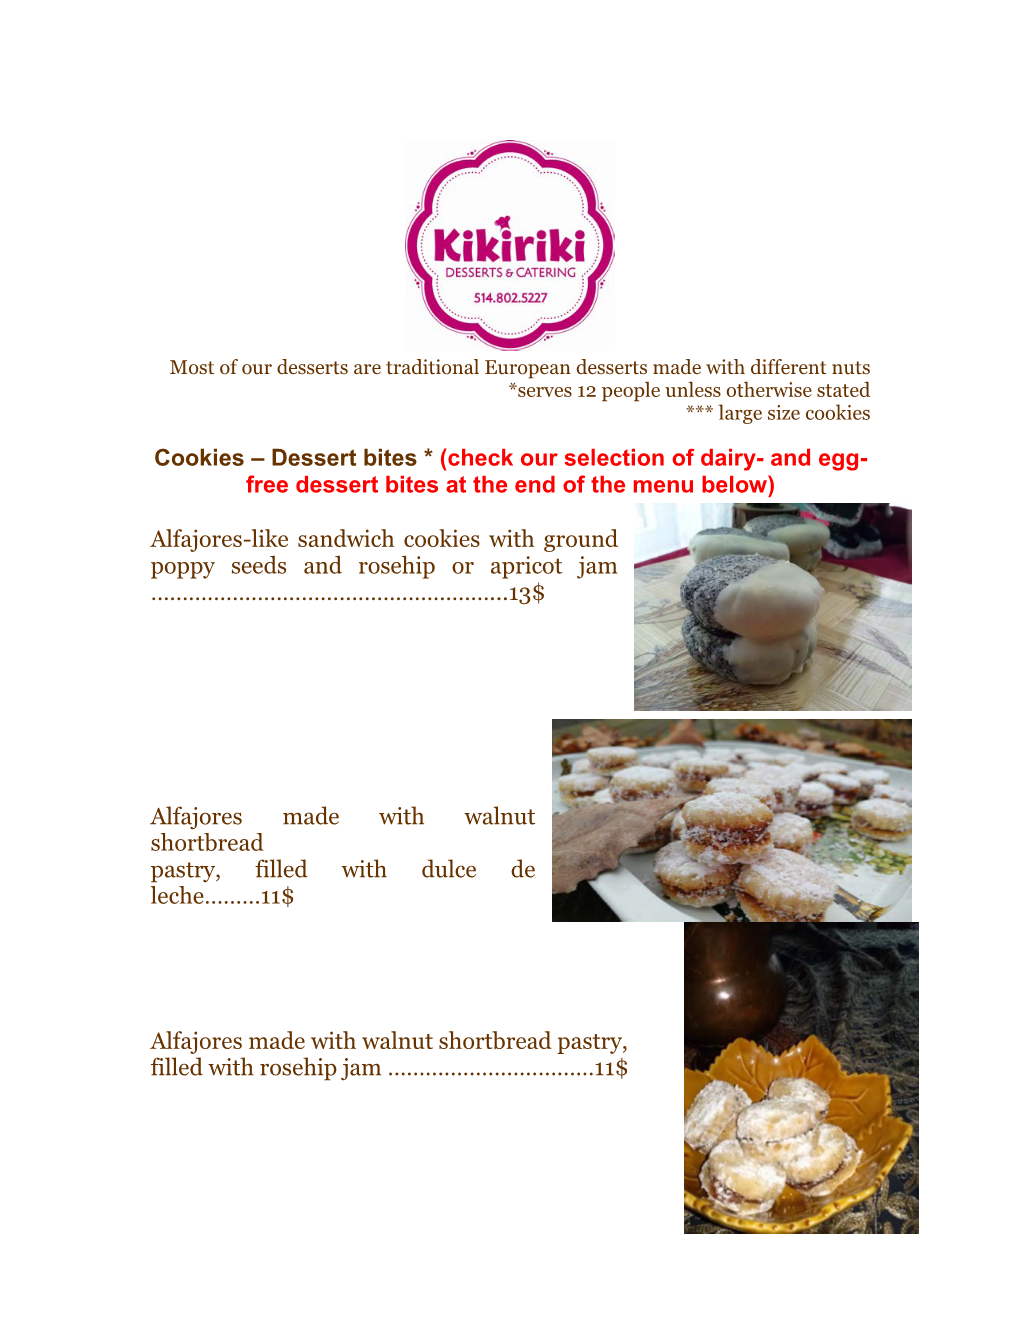 Dessert Bites * (Check Our Selection of Dairy- and Egg- Free Dessert Bites at the End of the Menu Below)